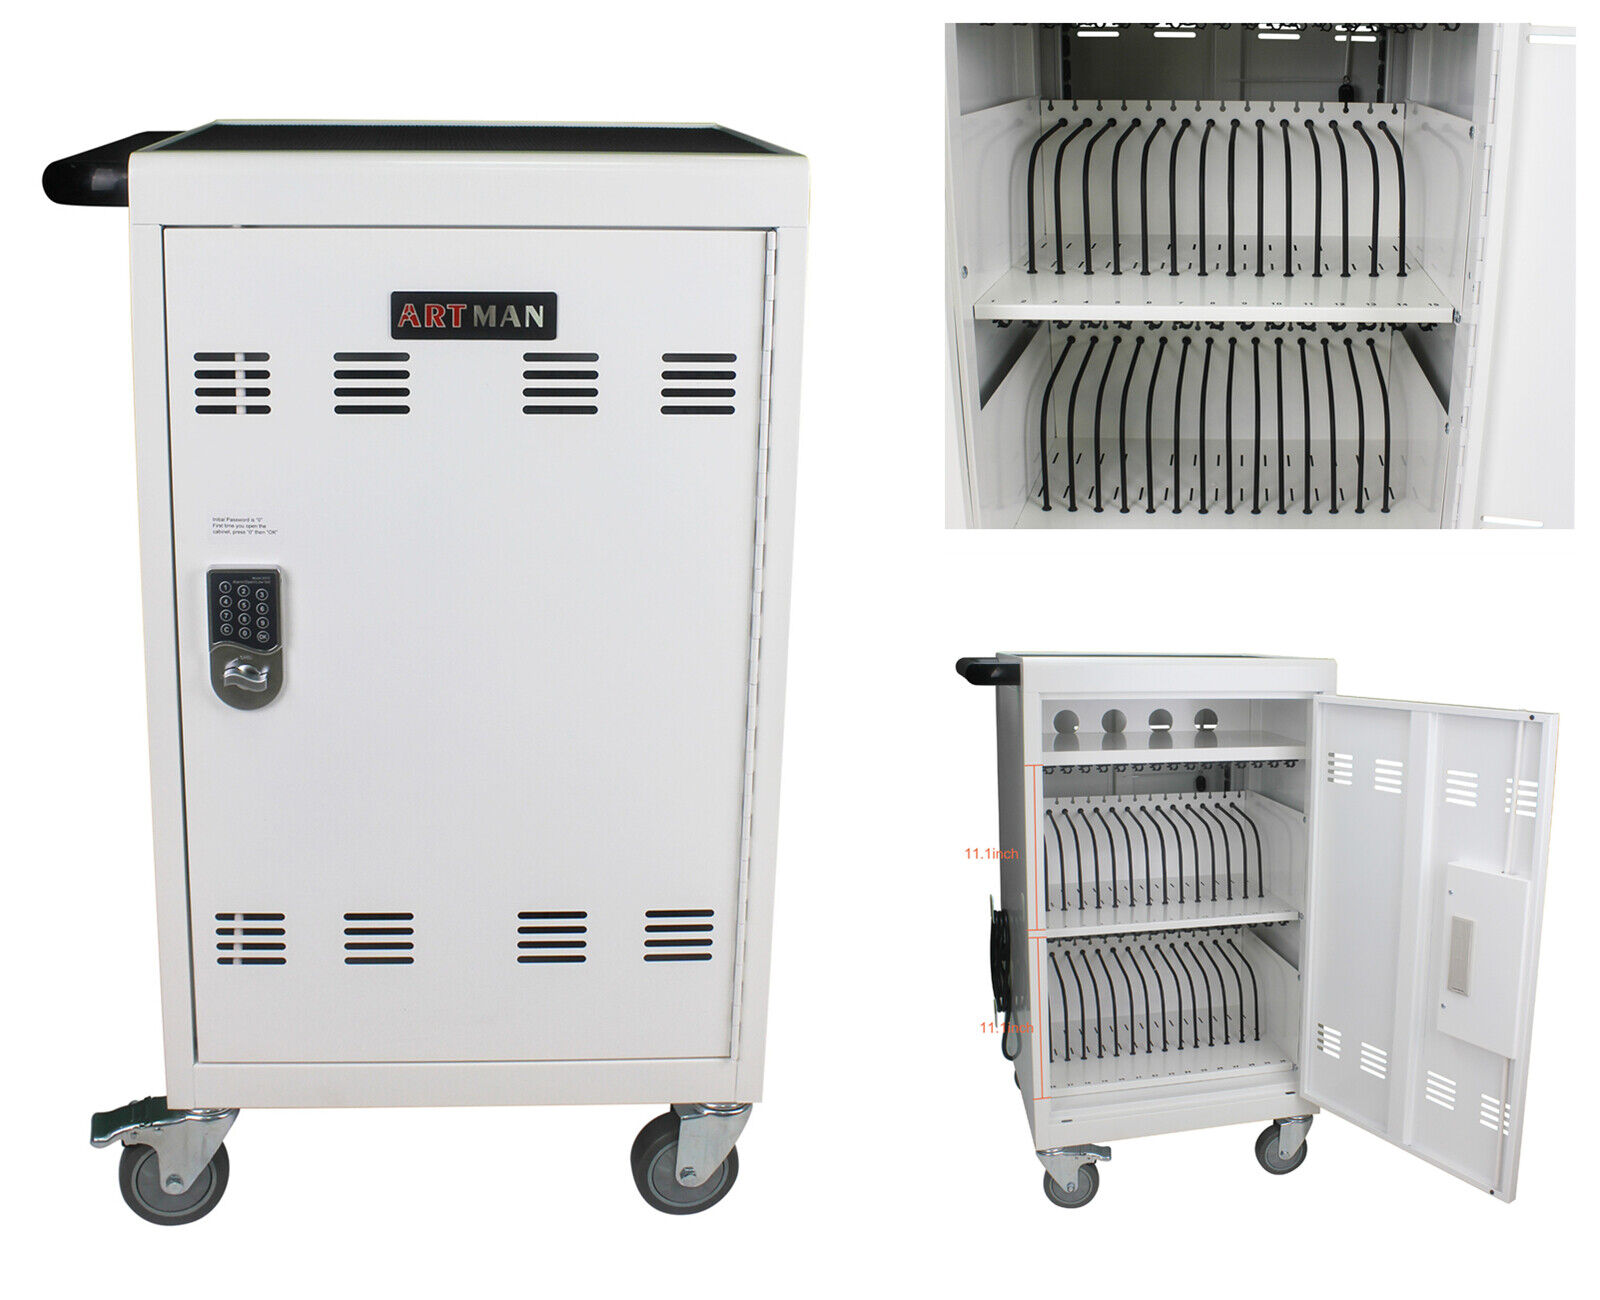 32 Device Mobile Charging Cart & Cabinet Storage for Tablets Laptops Computers